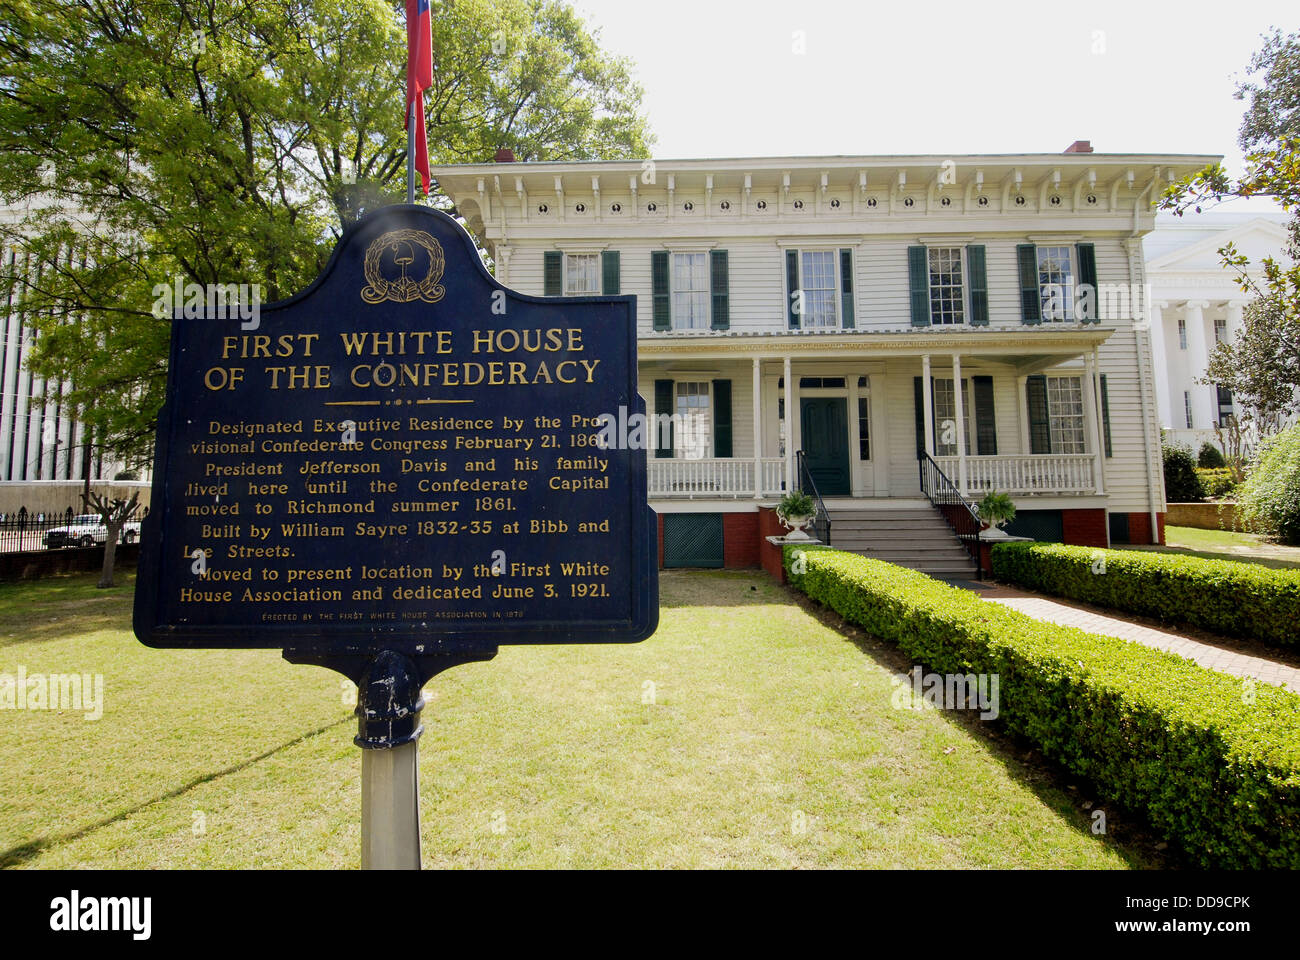 The first White House of the Confederacy in the historic city of Montgomery. Alabama, USA Stock Photo